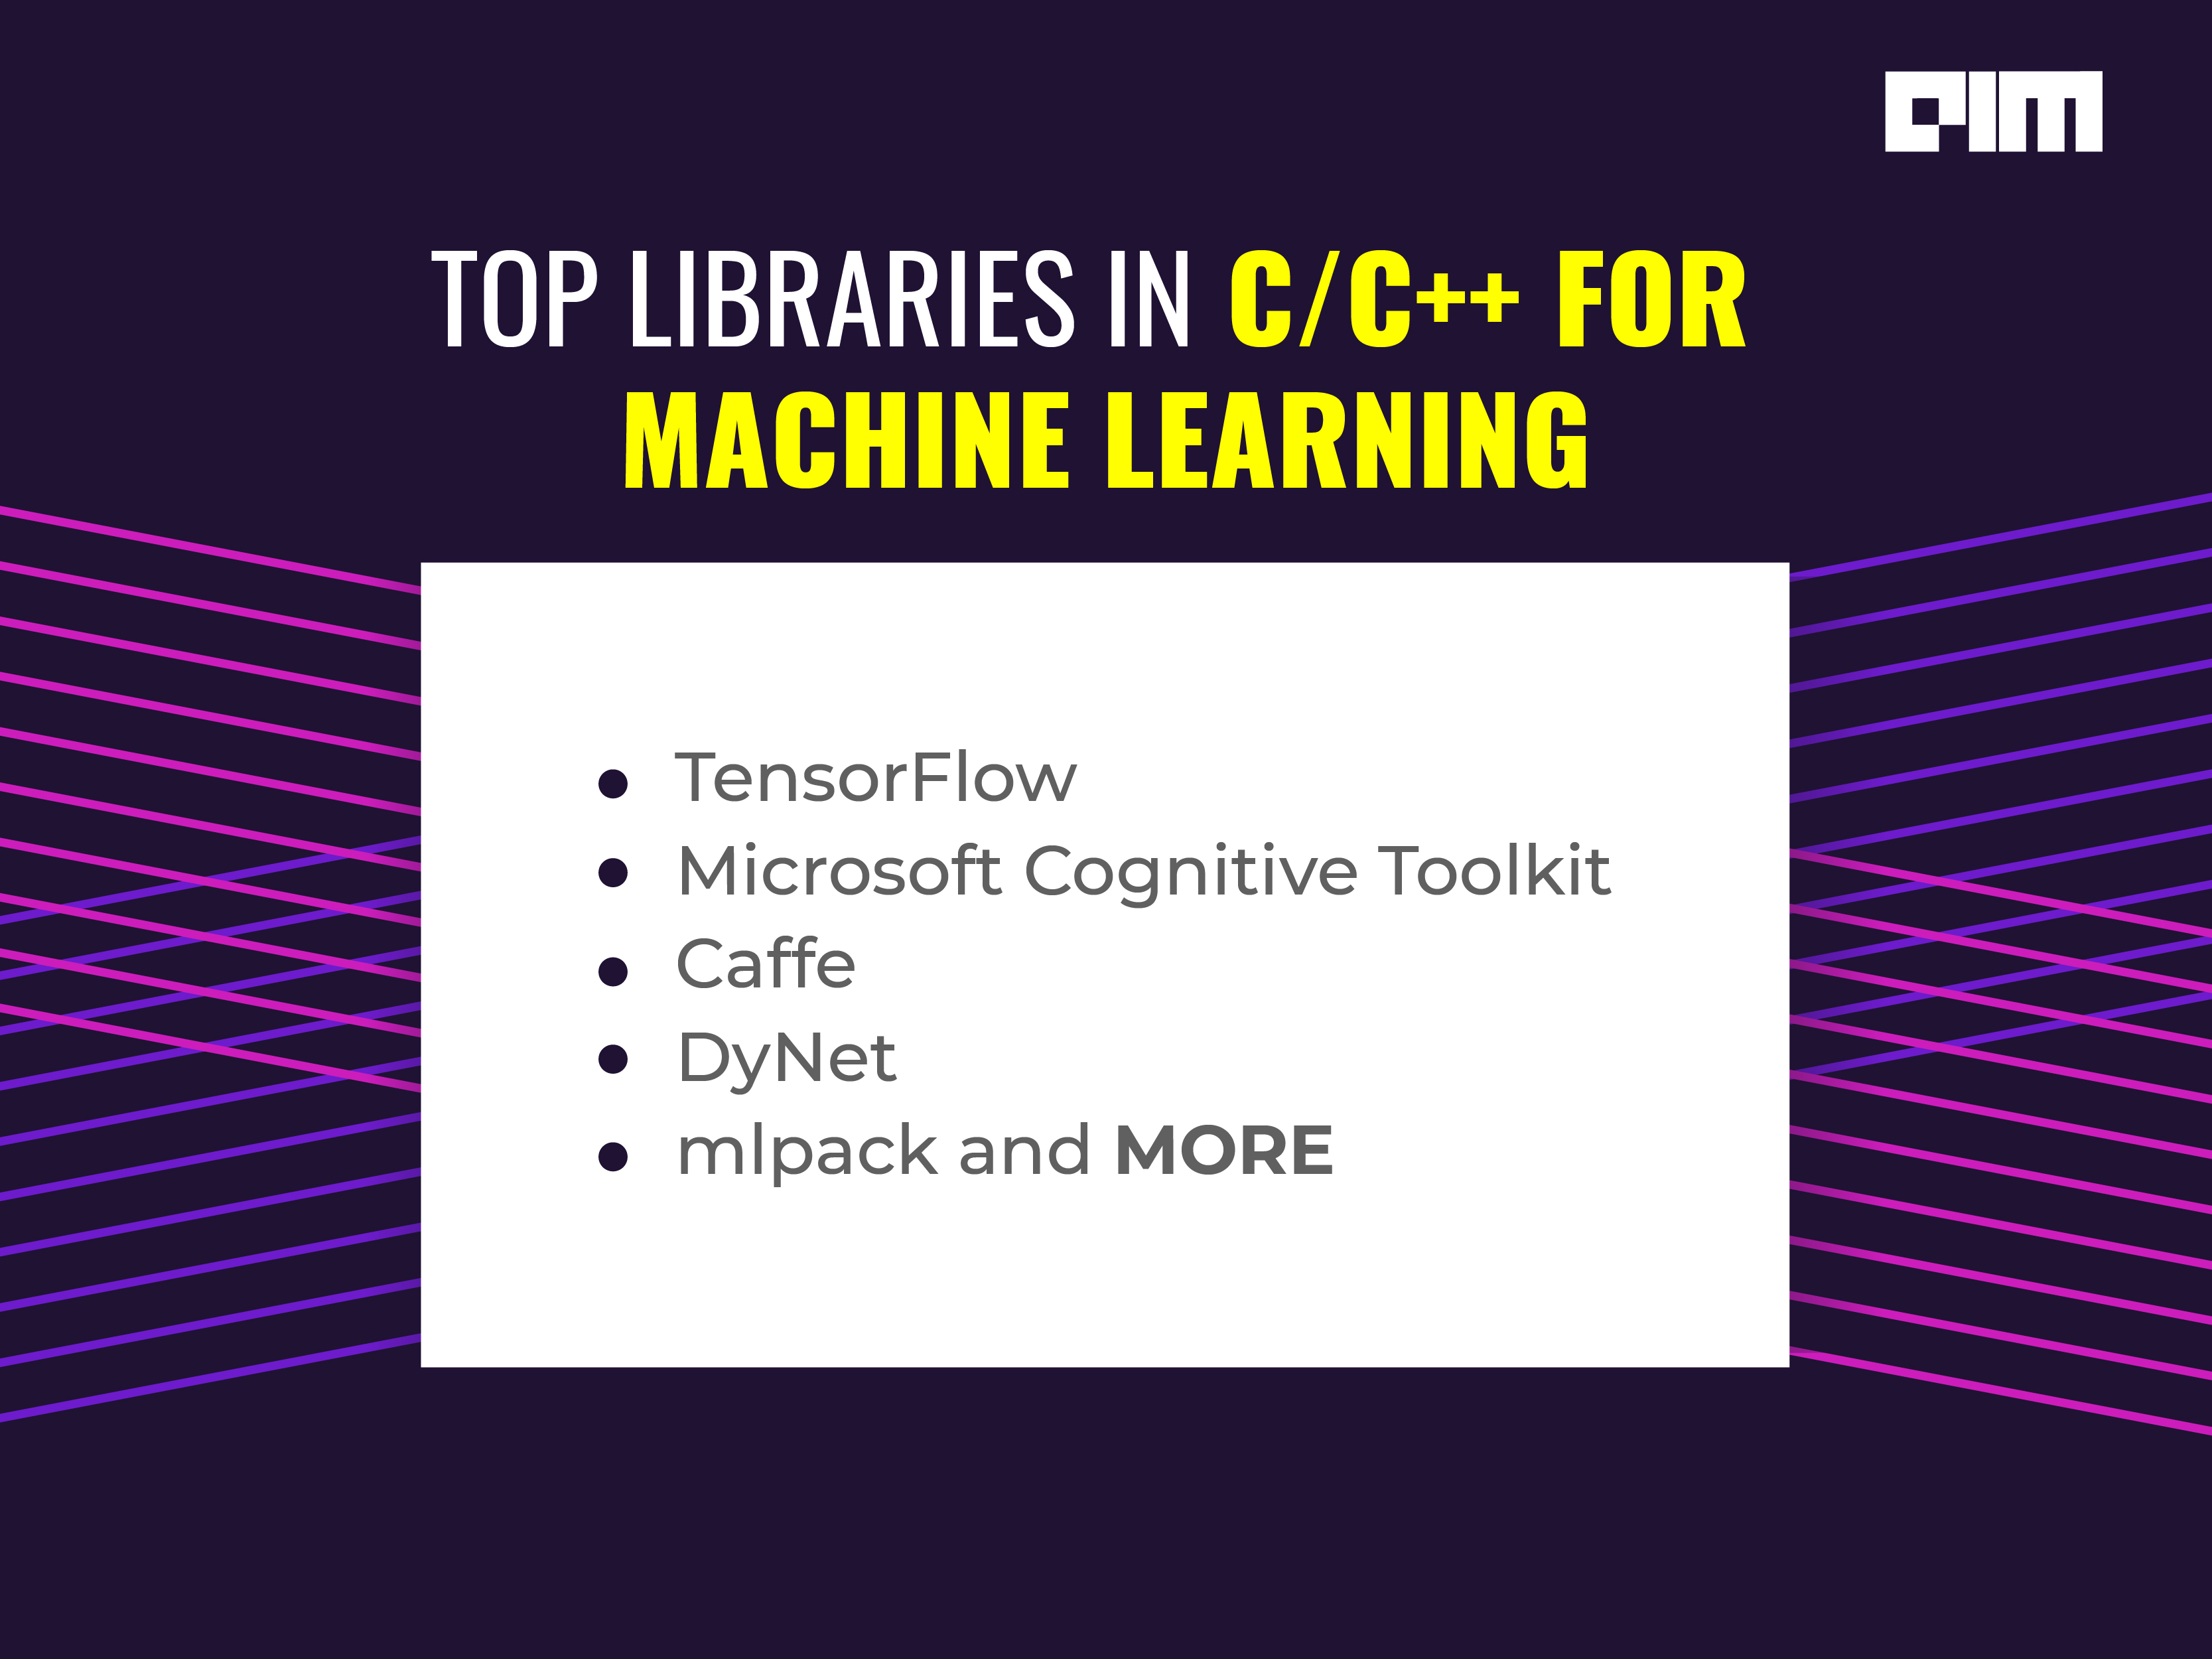 top 10 machine learning